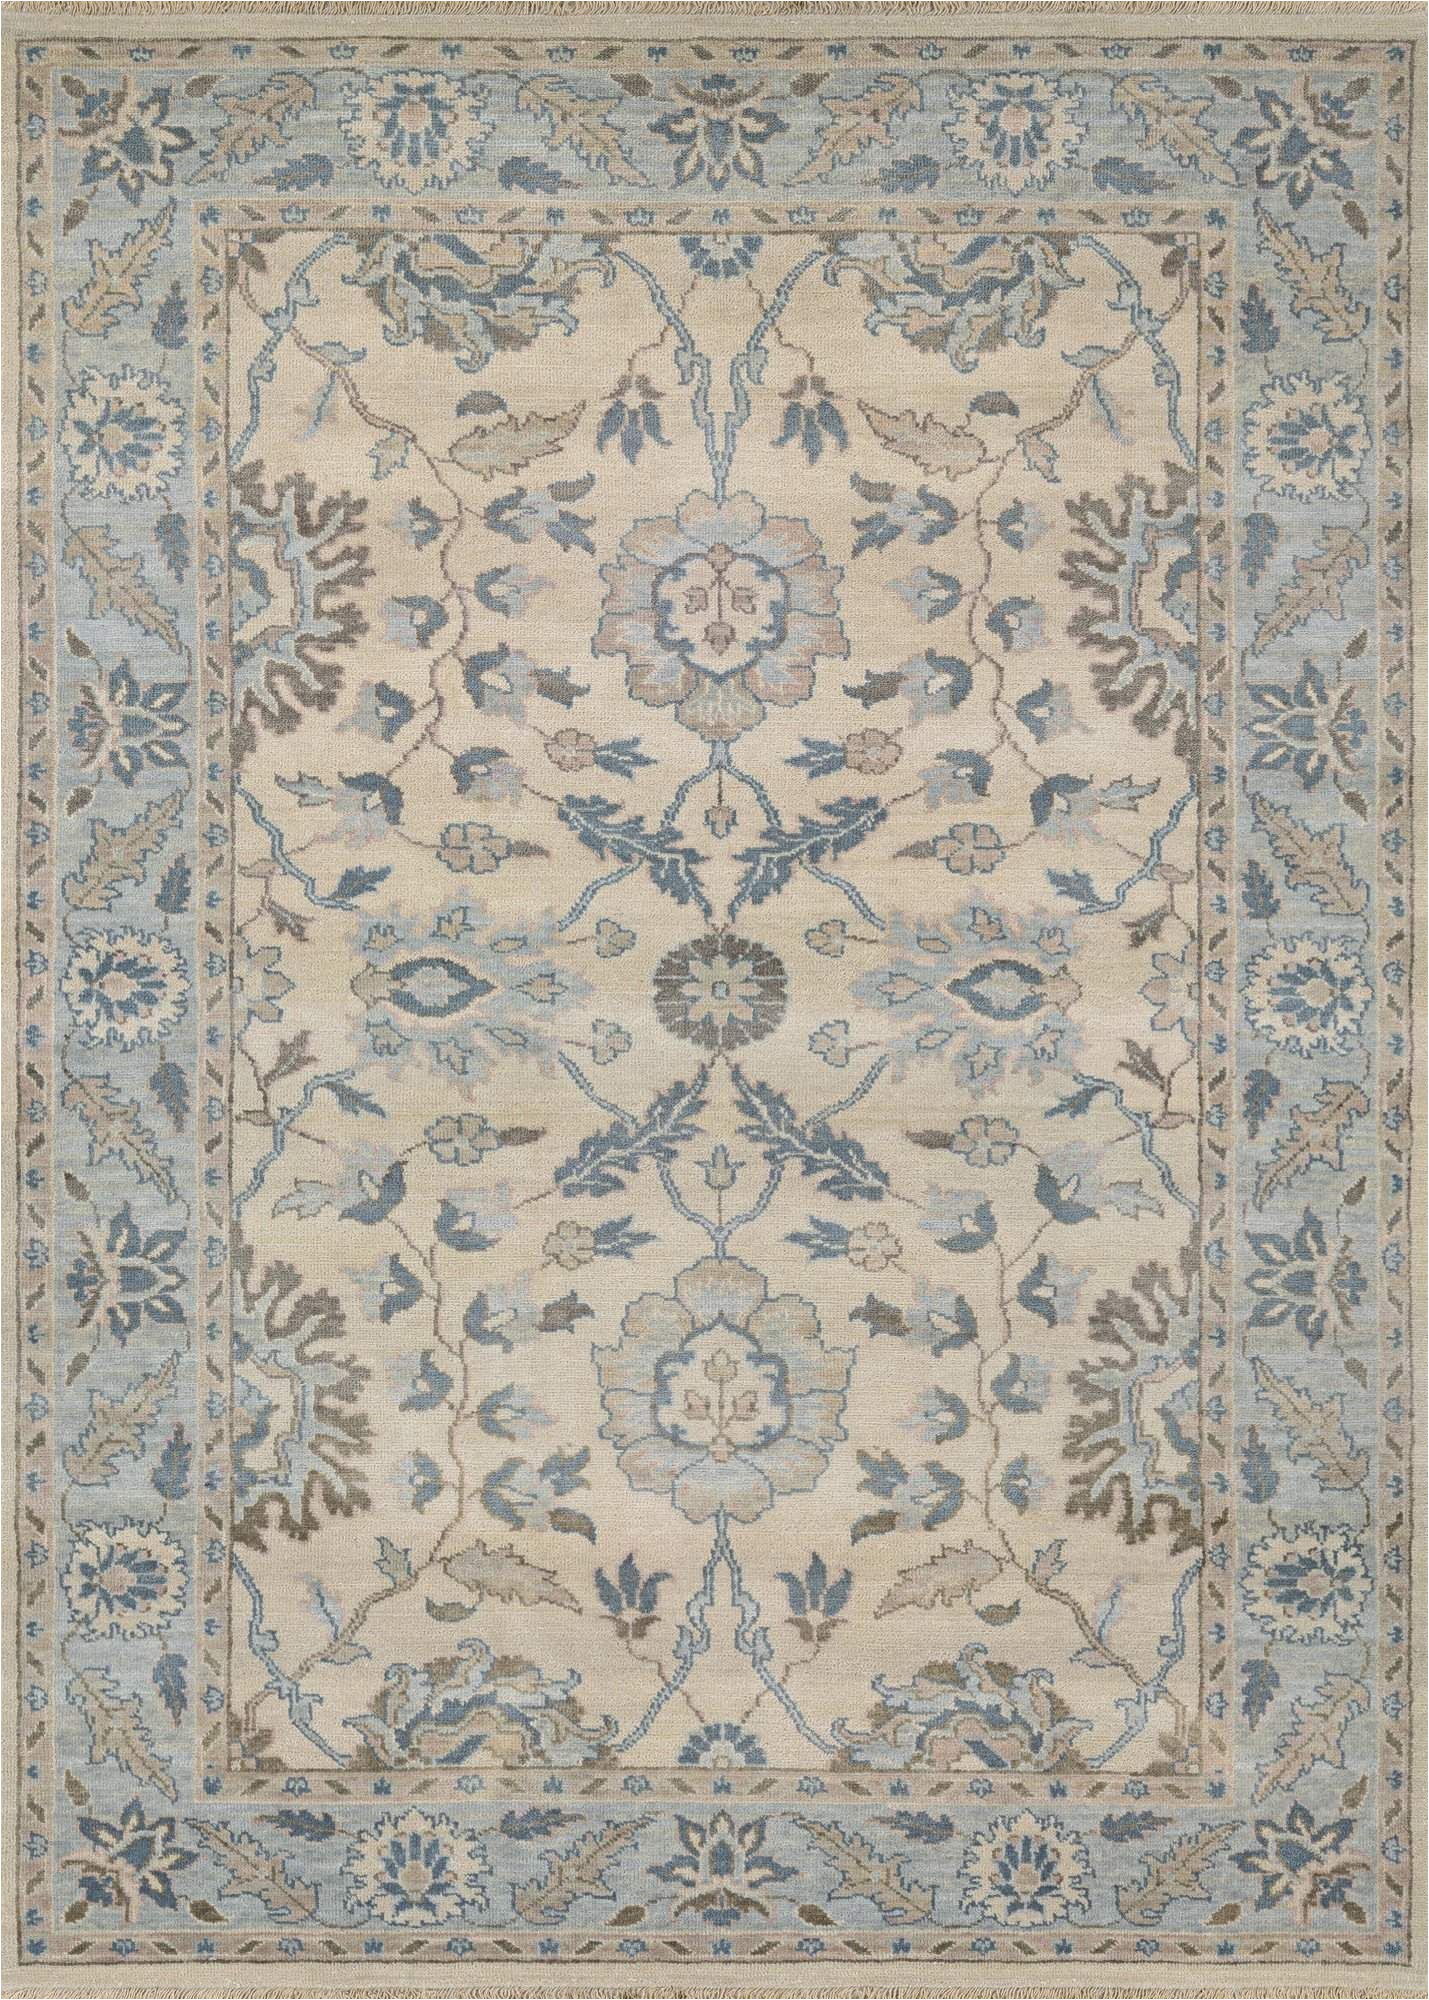 Area Rugs that Can Be Washed Traditional area Rug Designs Take New Meaning In Couristans